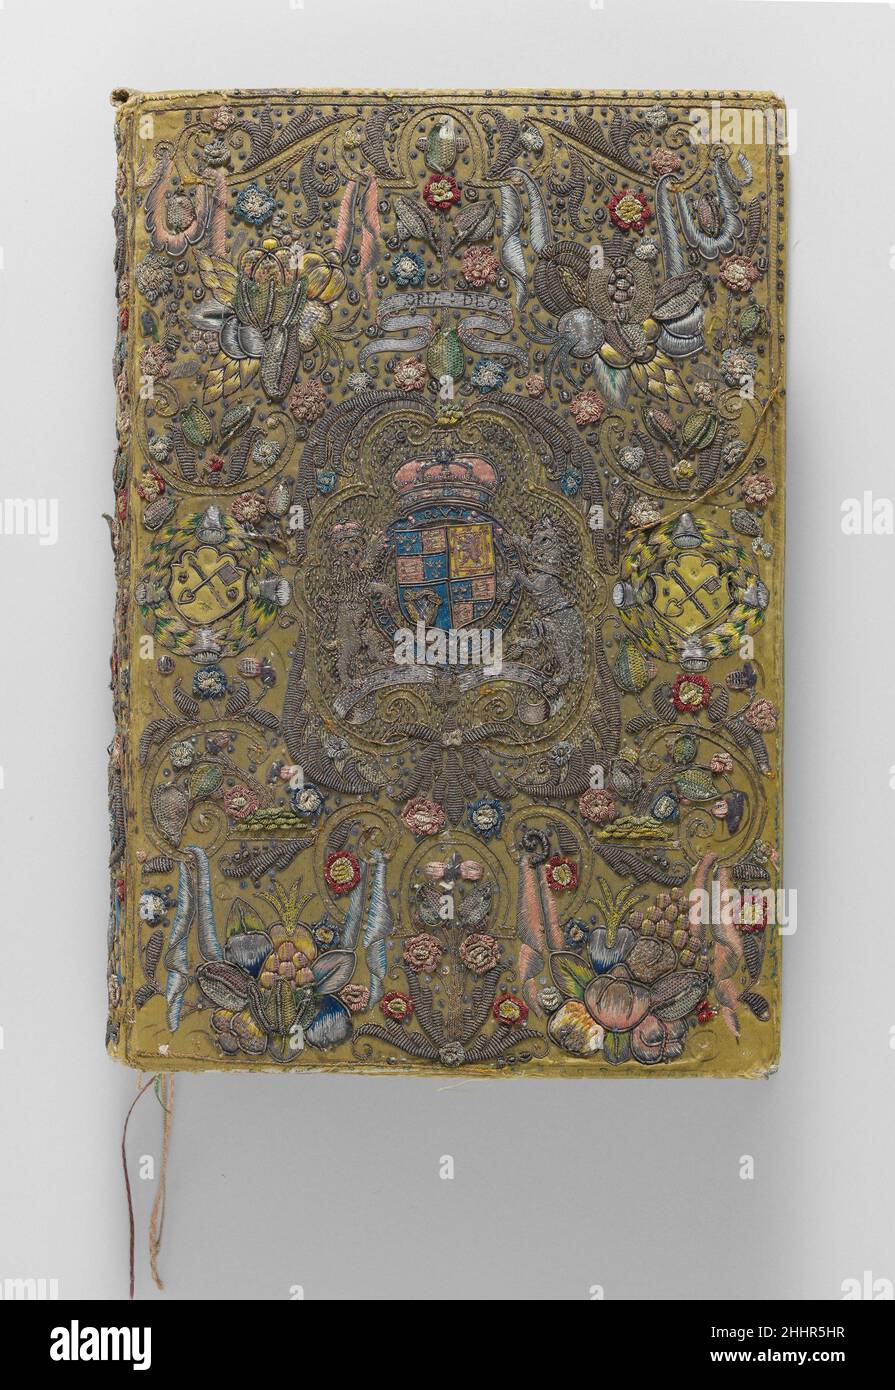 The Bible, The Book of Common Prayer, The Book of Psalms with Royal Stuart arms ca. 1624 The Book of Common Prayer printed by Robert Barker This elaborate quarto-size bookbinding is the work of a professional embroiderer and contains a rich variety of materials applied with a series of complex and imaginative techniques. The composition of the cover and matching back is dominated by a central royal blazon of the Stuart monarchy quartered with the arms of England, Scotland, and Ireland. The arms are surmounted by the royal crown and supported by a lion and unicorn engaging the shield with the O Stock Photo